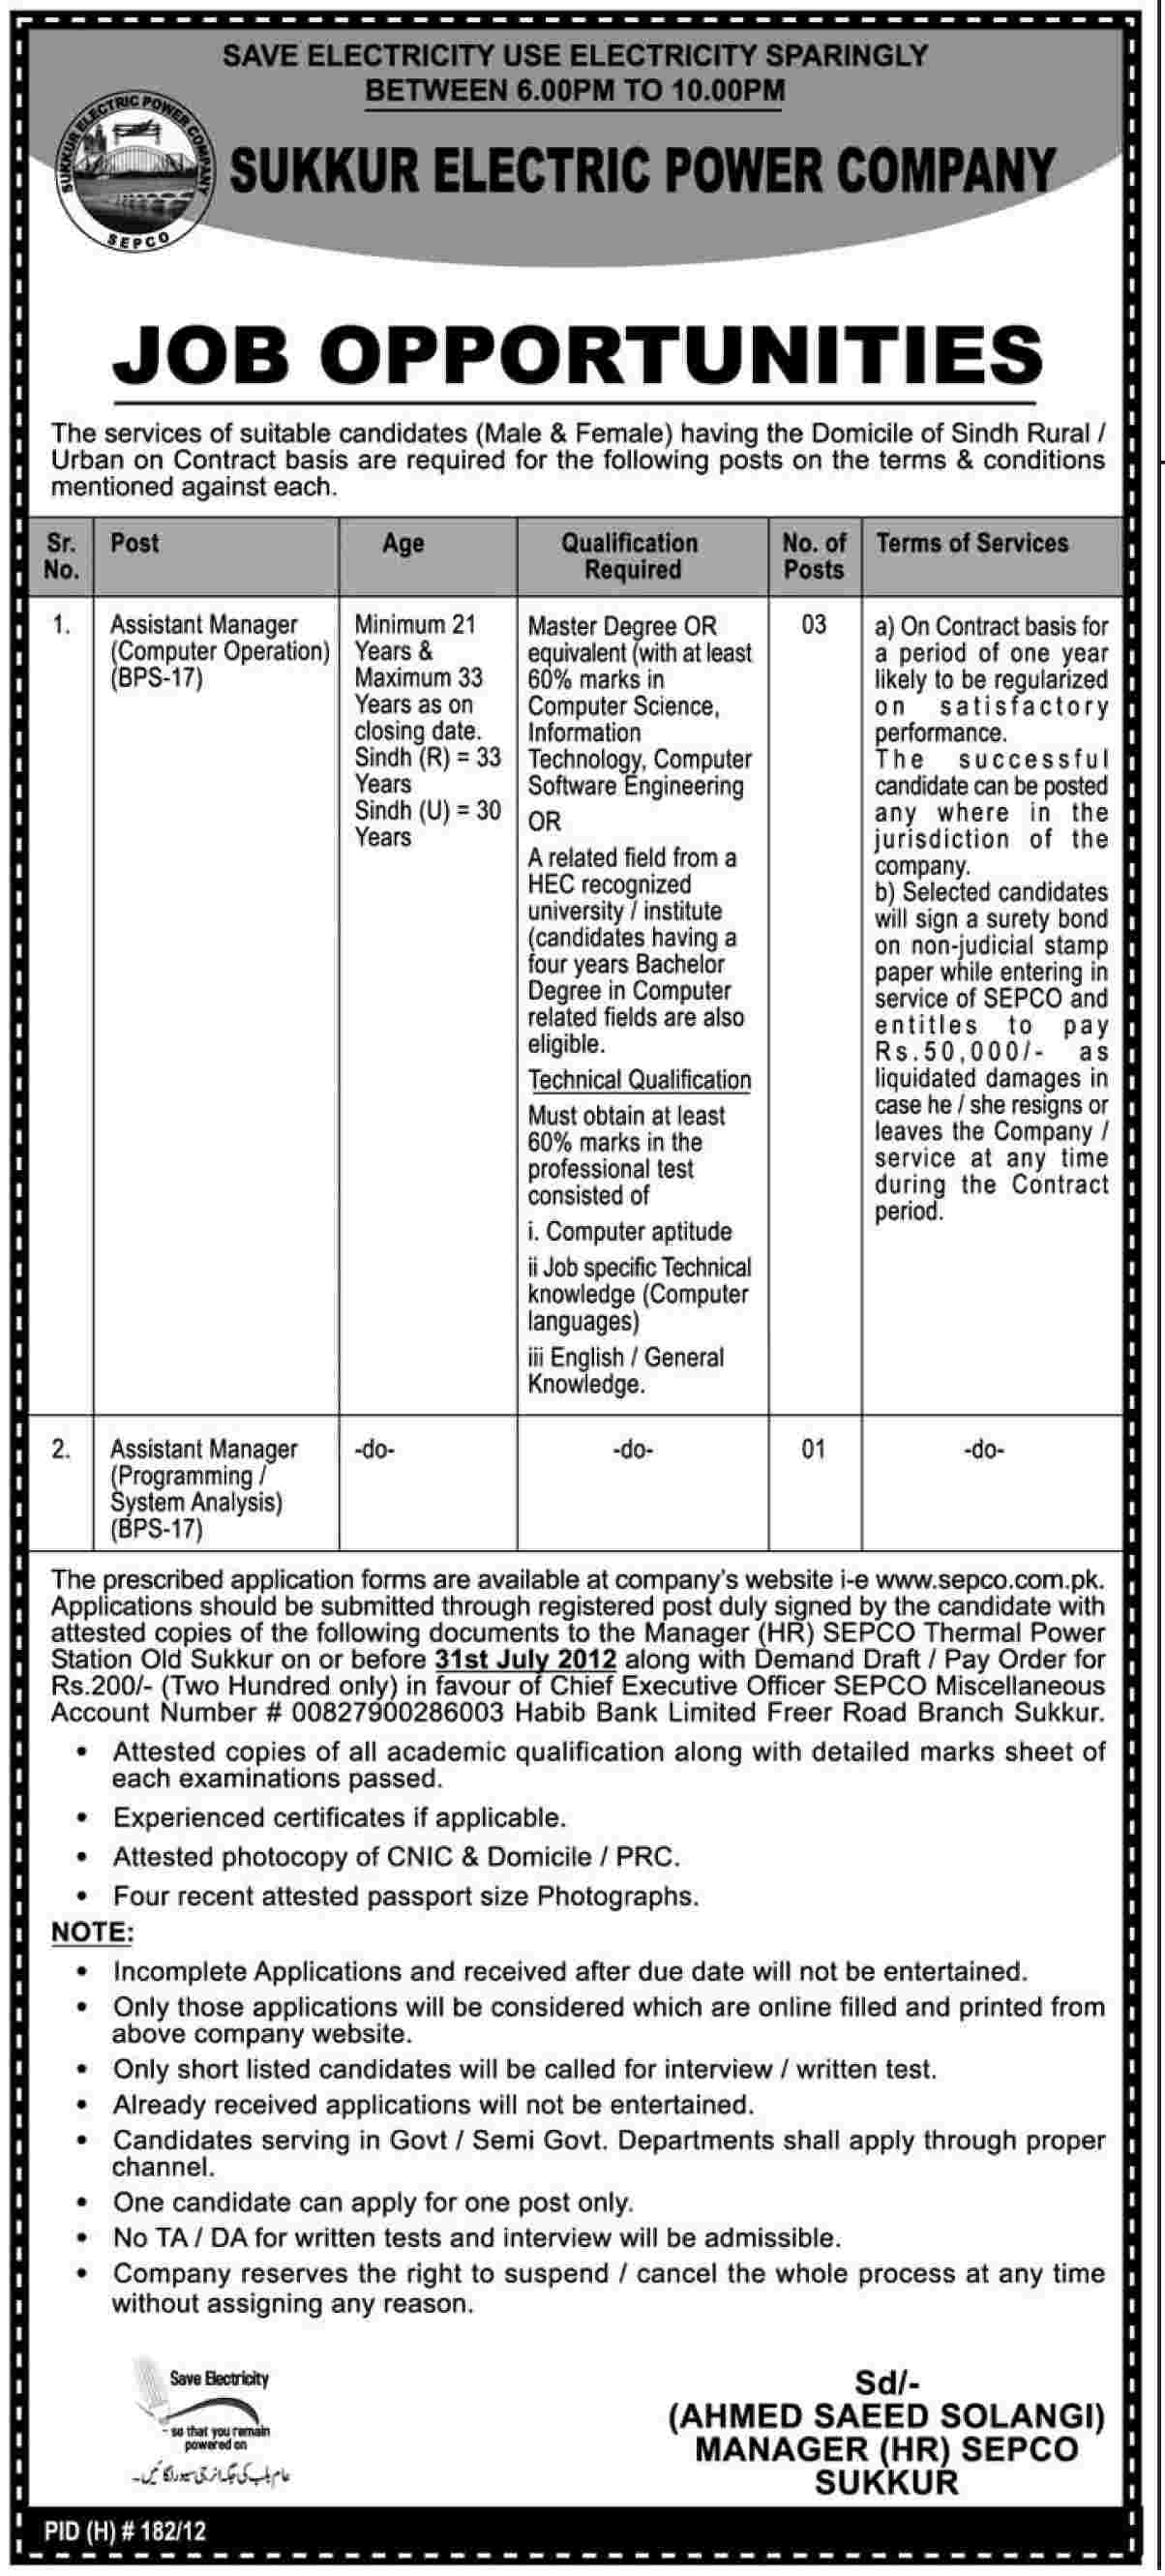 Sukkur Electric Power Company (SEPCO) Requires IT Management Staff (Government Job)